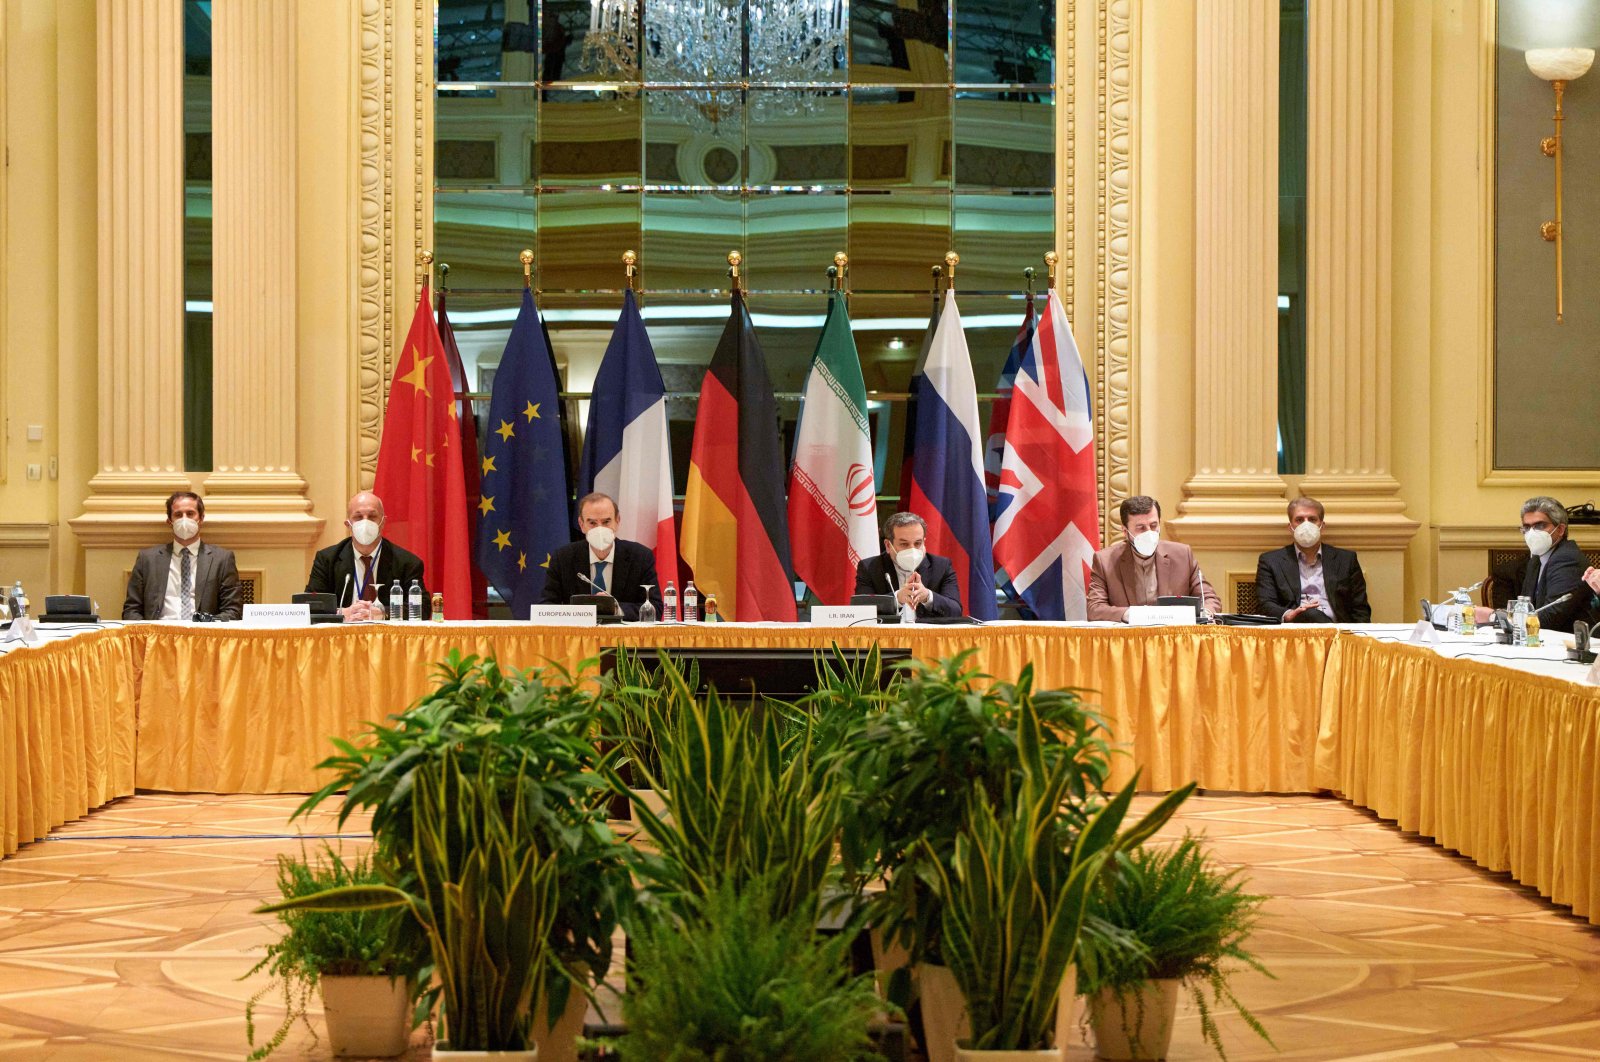 The EU Delegation in Vienna shows delegation members from the parties of the Iran nuclear deal – Germany, France, Britain, China, Russia and Iran – attending a meeting at the Grand Hotel of Vienna as they try to restore the deal, Austria, April 17, 2021. (AFP Photo)